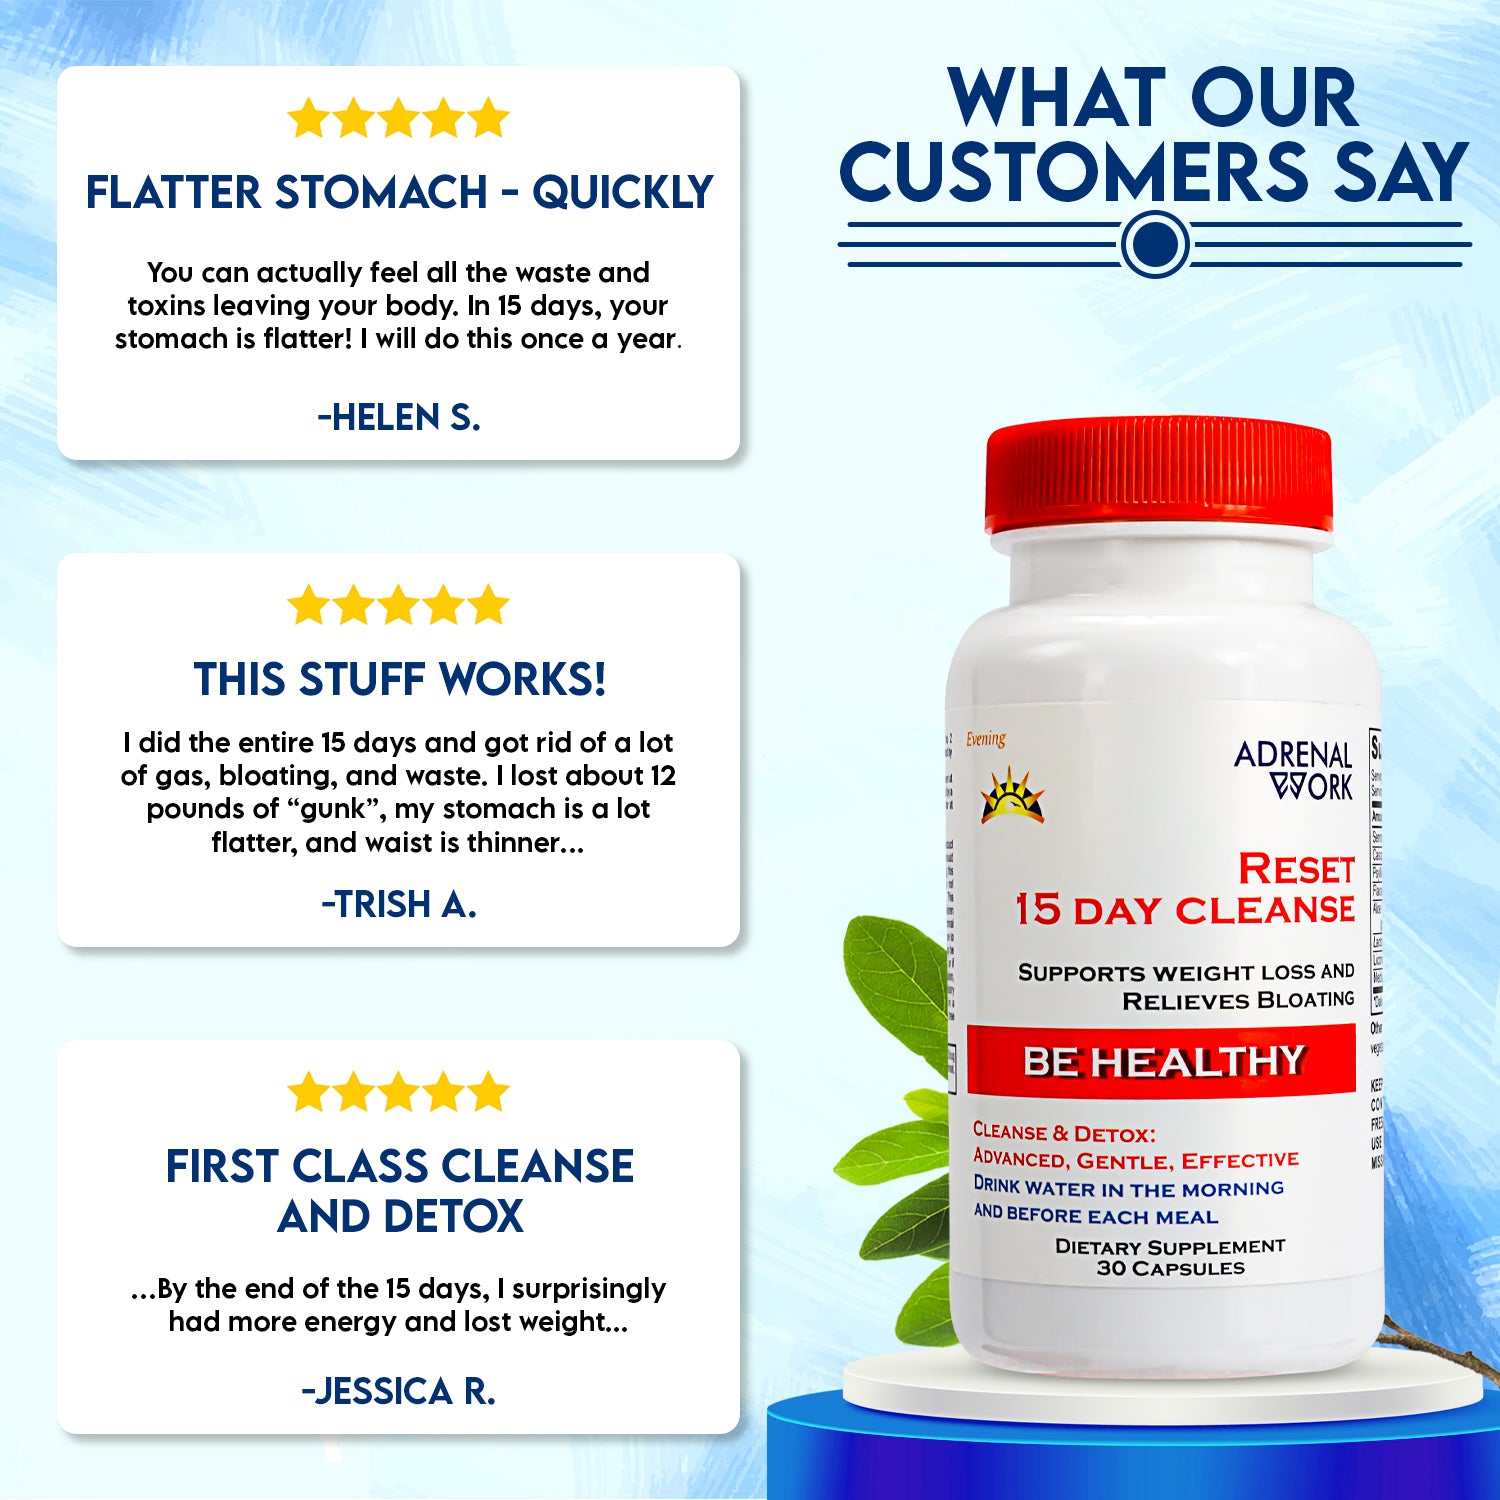 RESET : 15 DAY CLEANSE AND DETOX